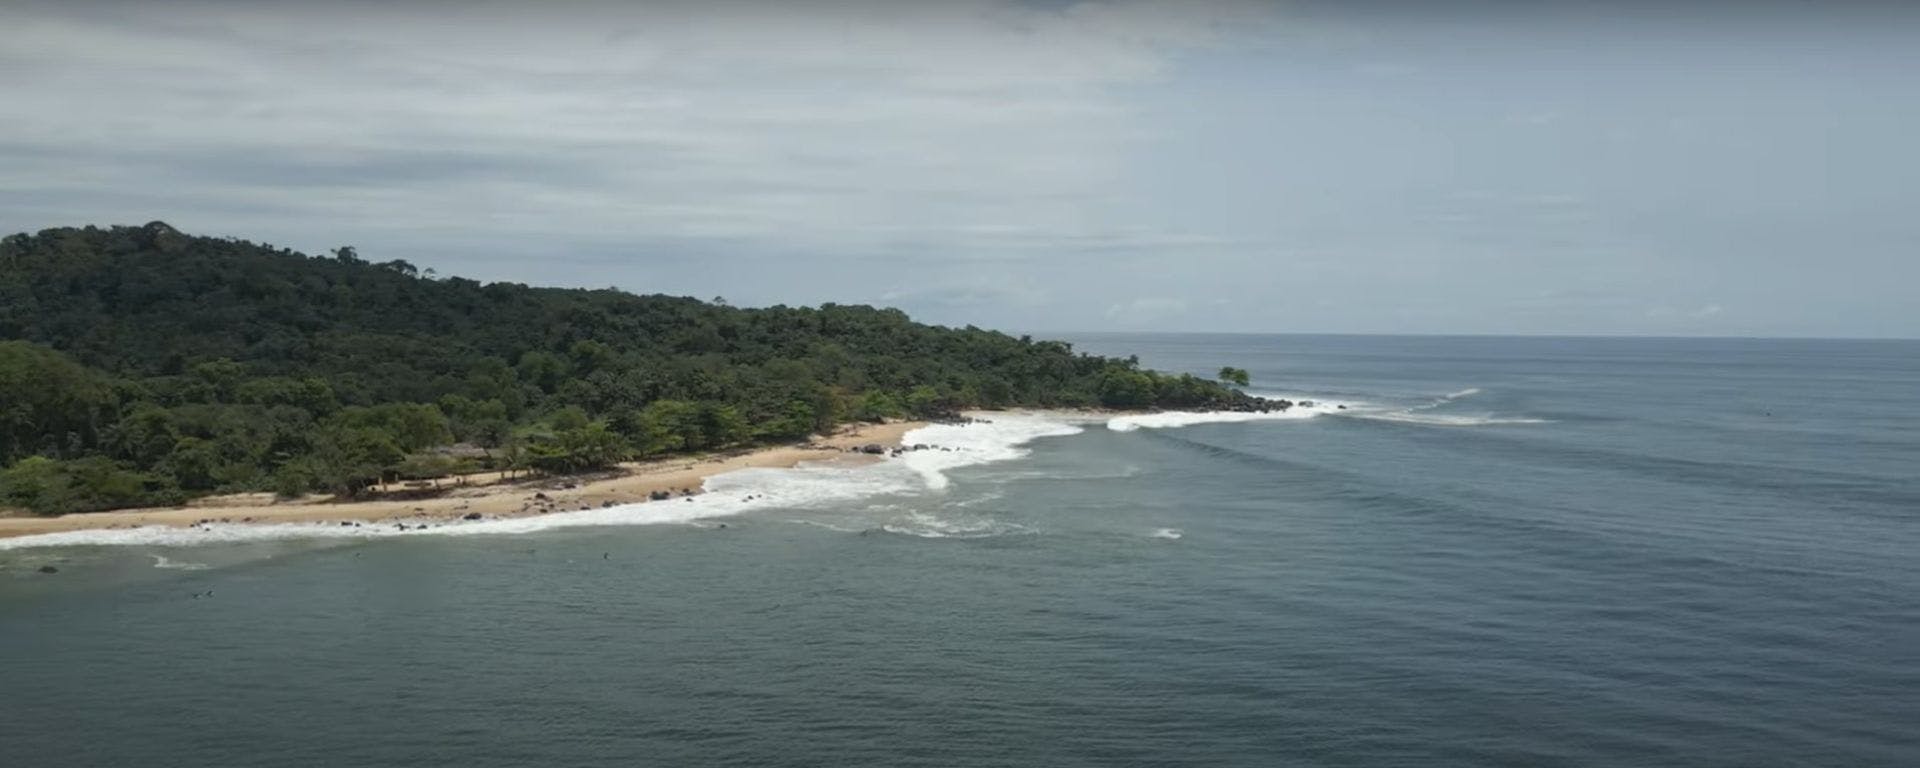 Coworking, Coliving and Surfing in Robersport (Liberia)